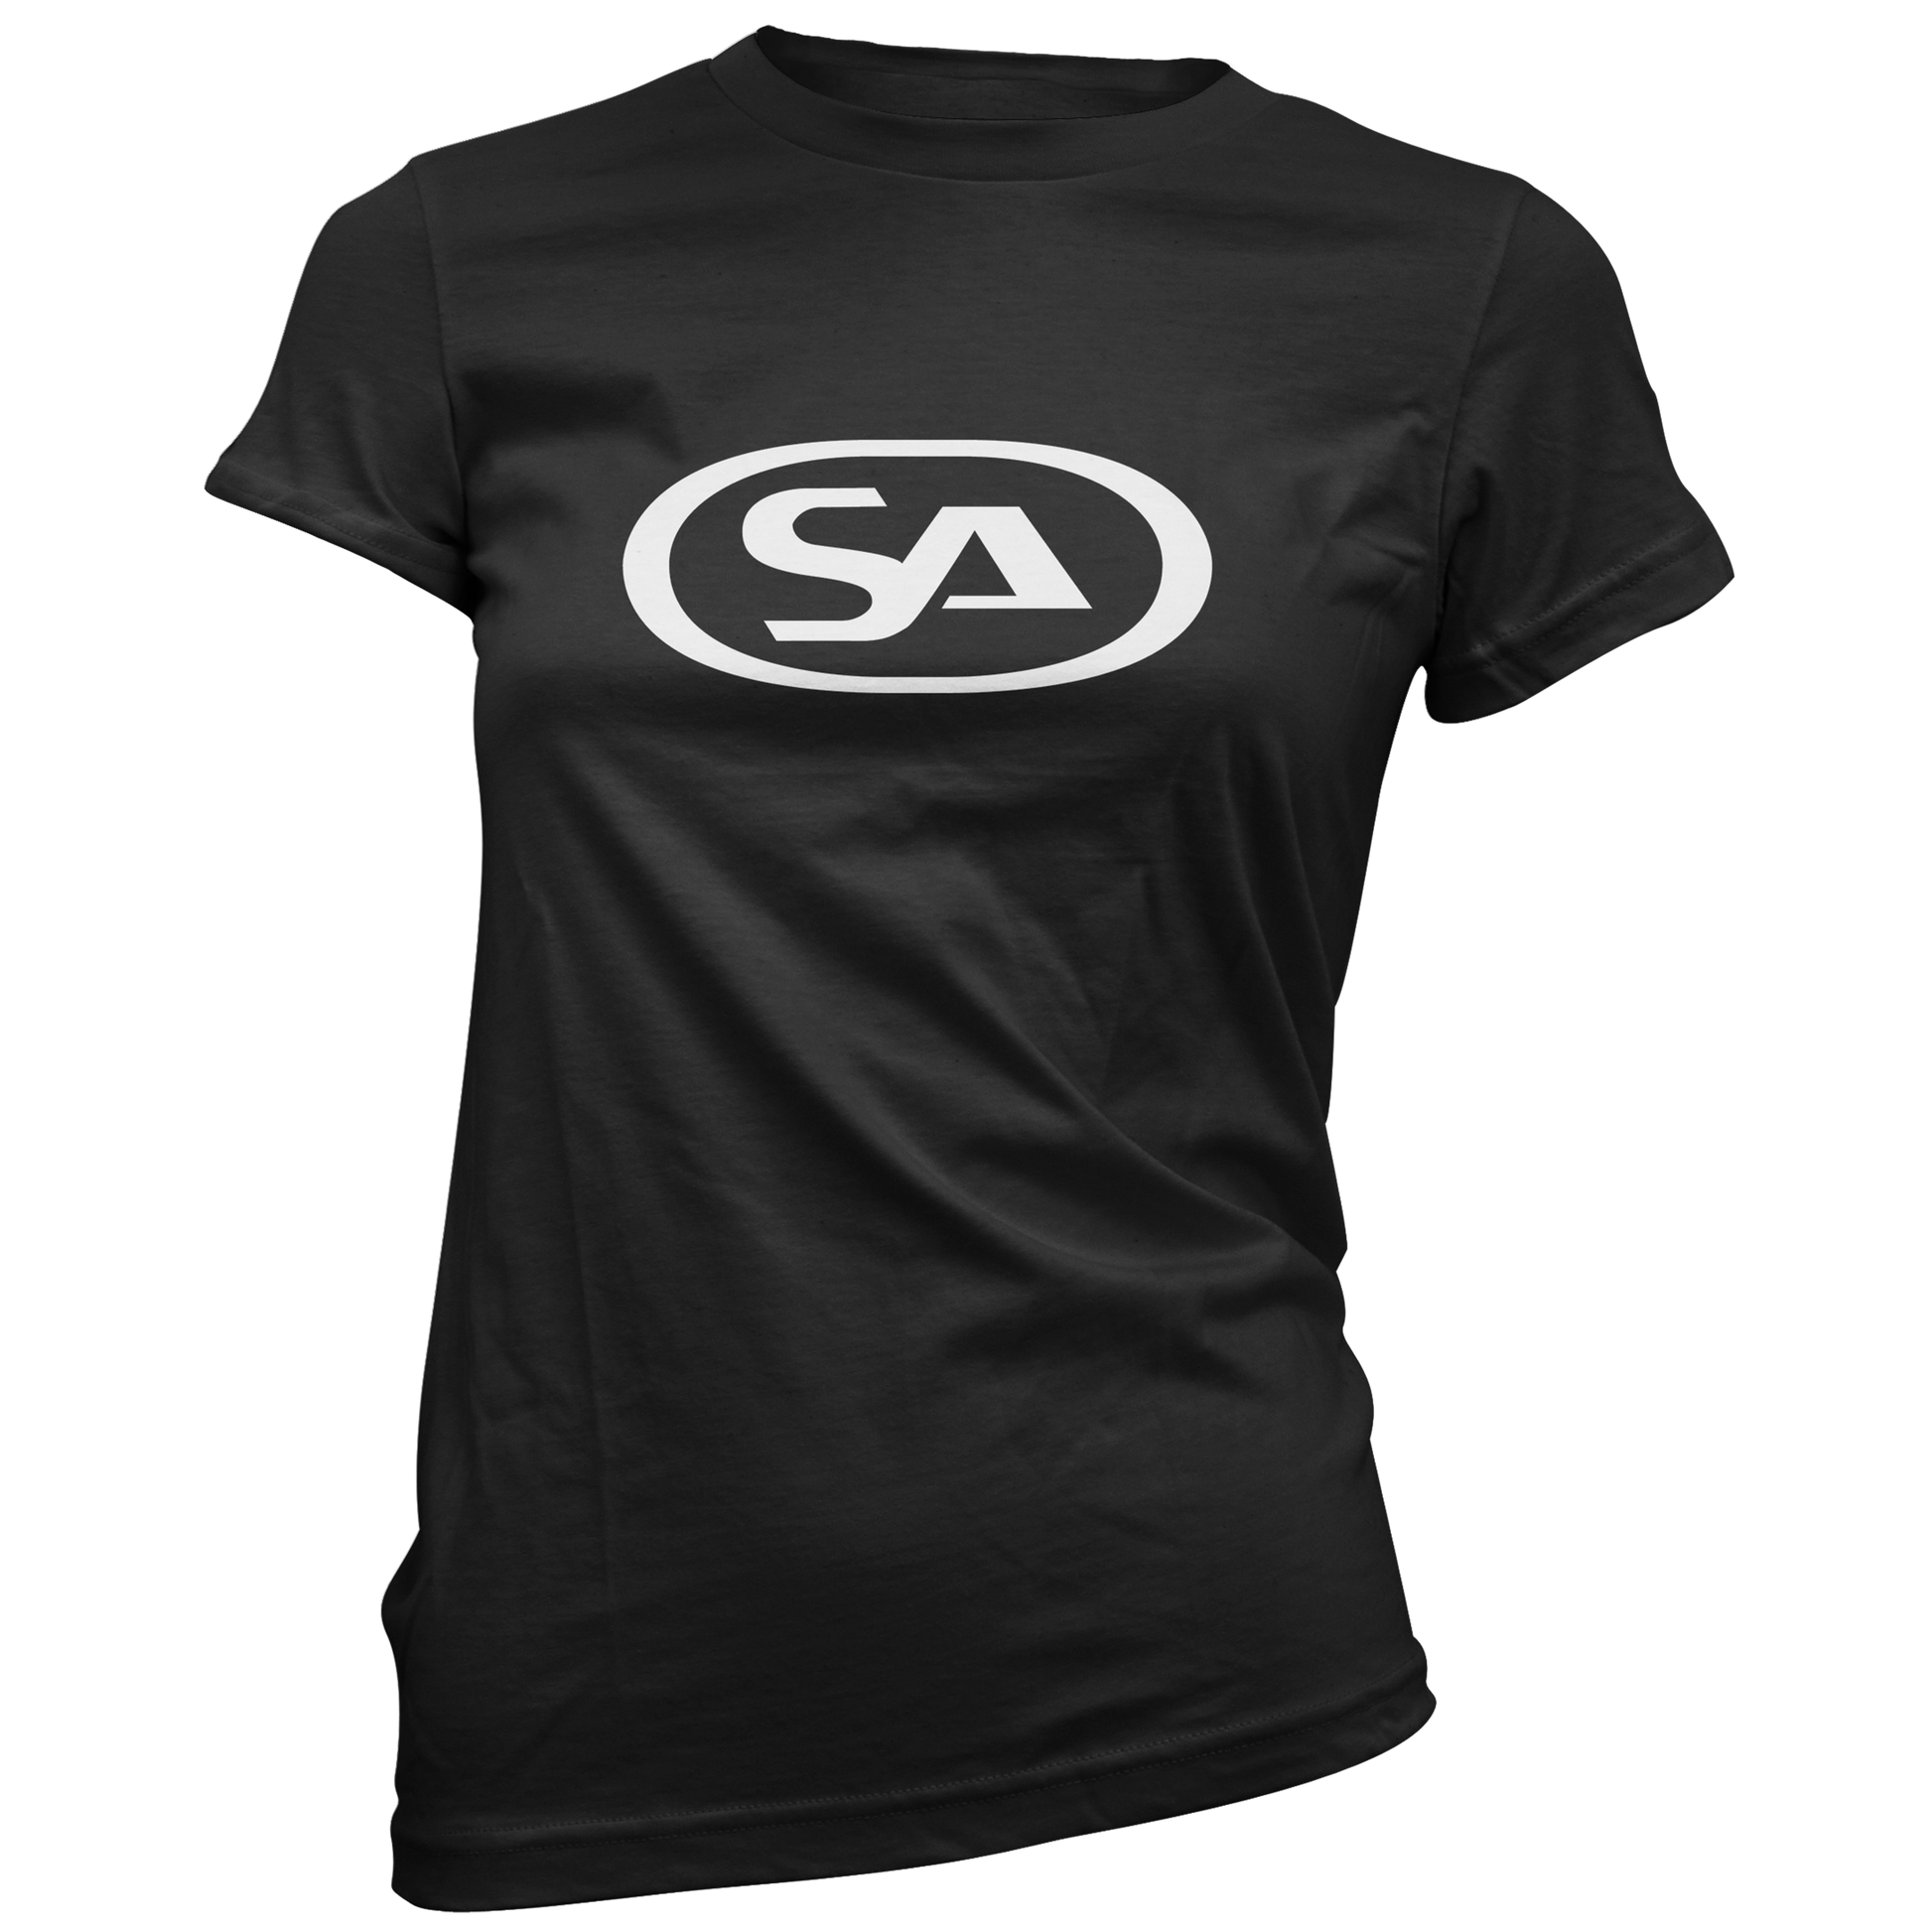 SA Logo - T-shirt (Women's) | Skunk Anansie Official Store